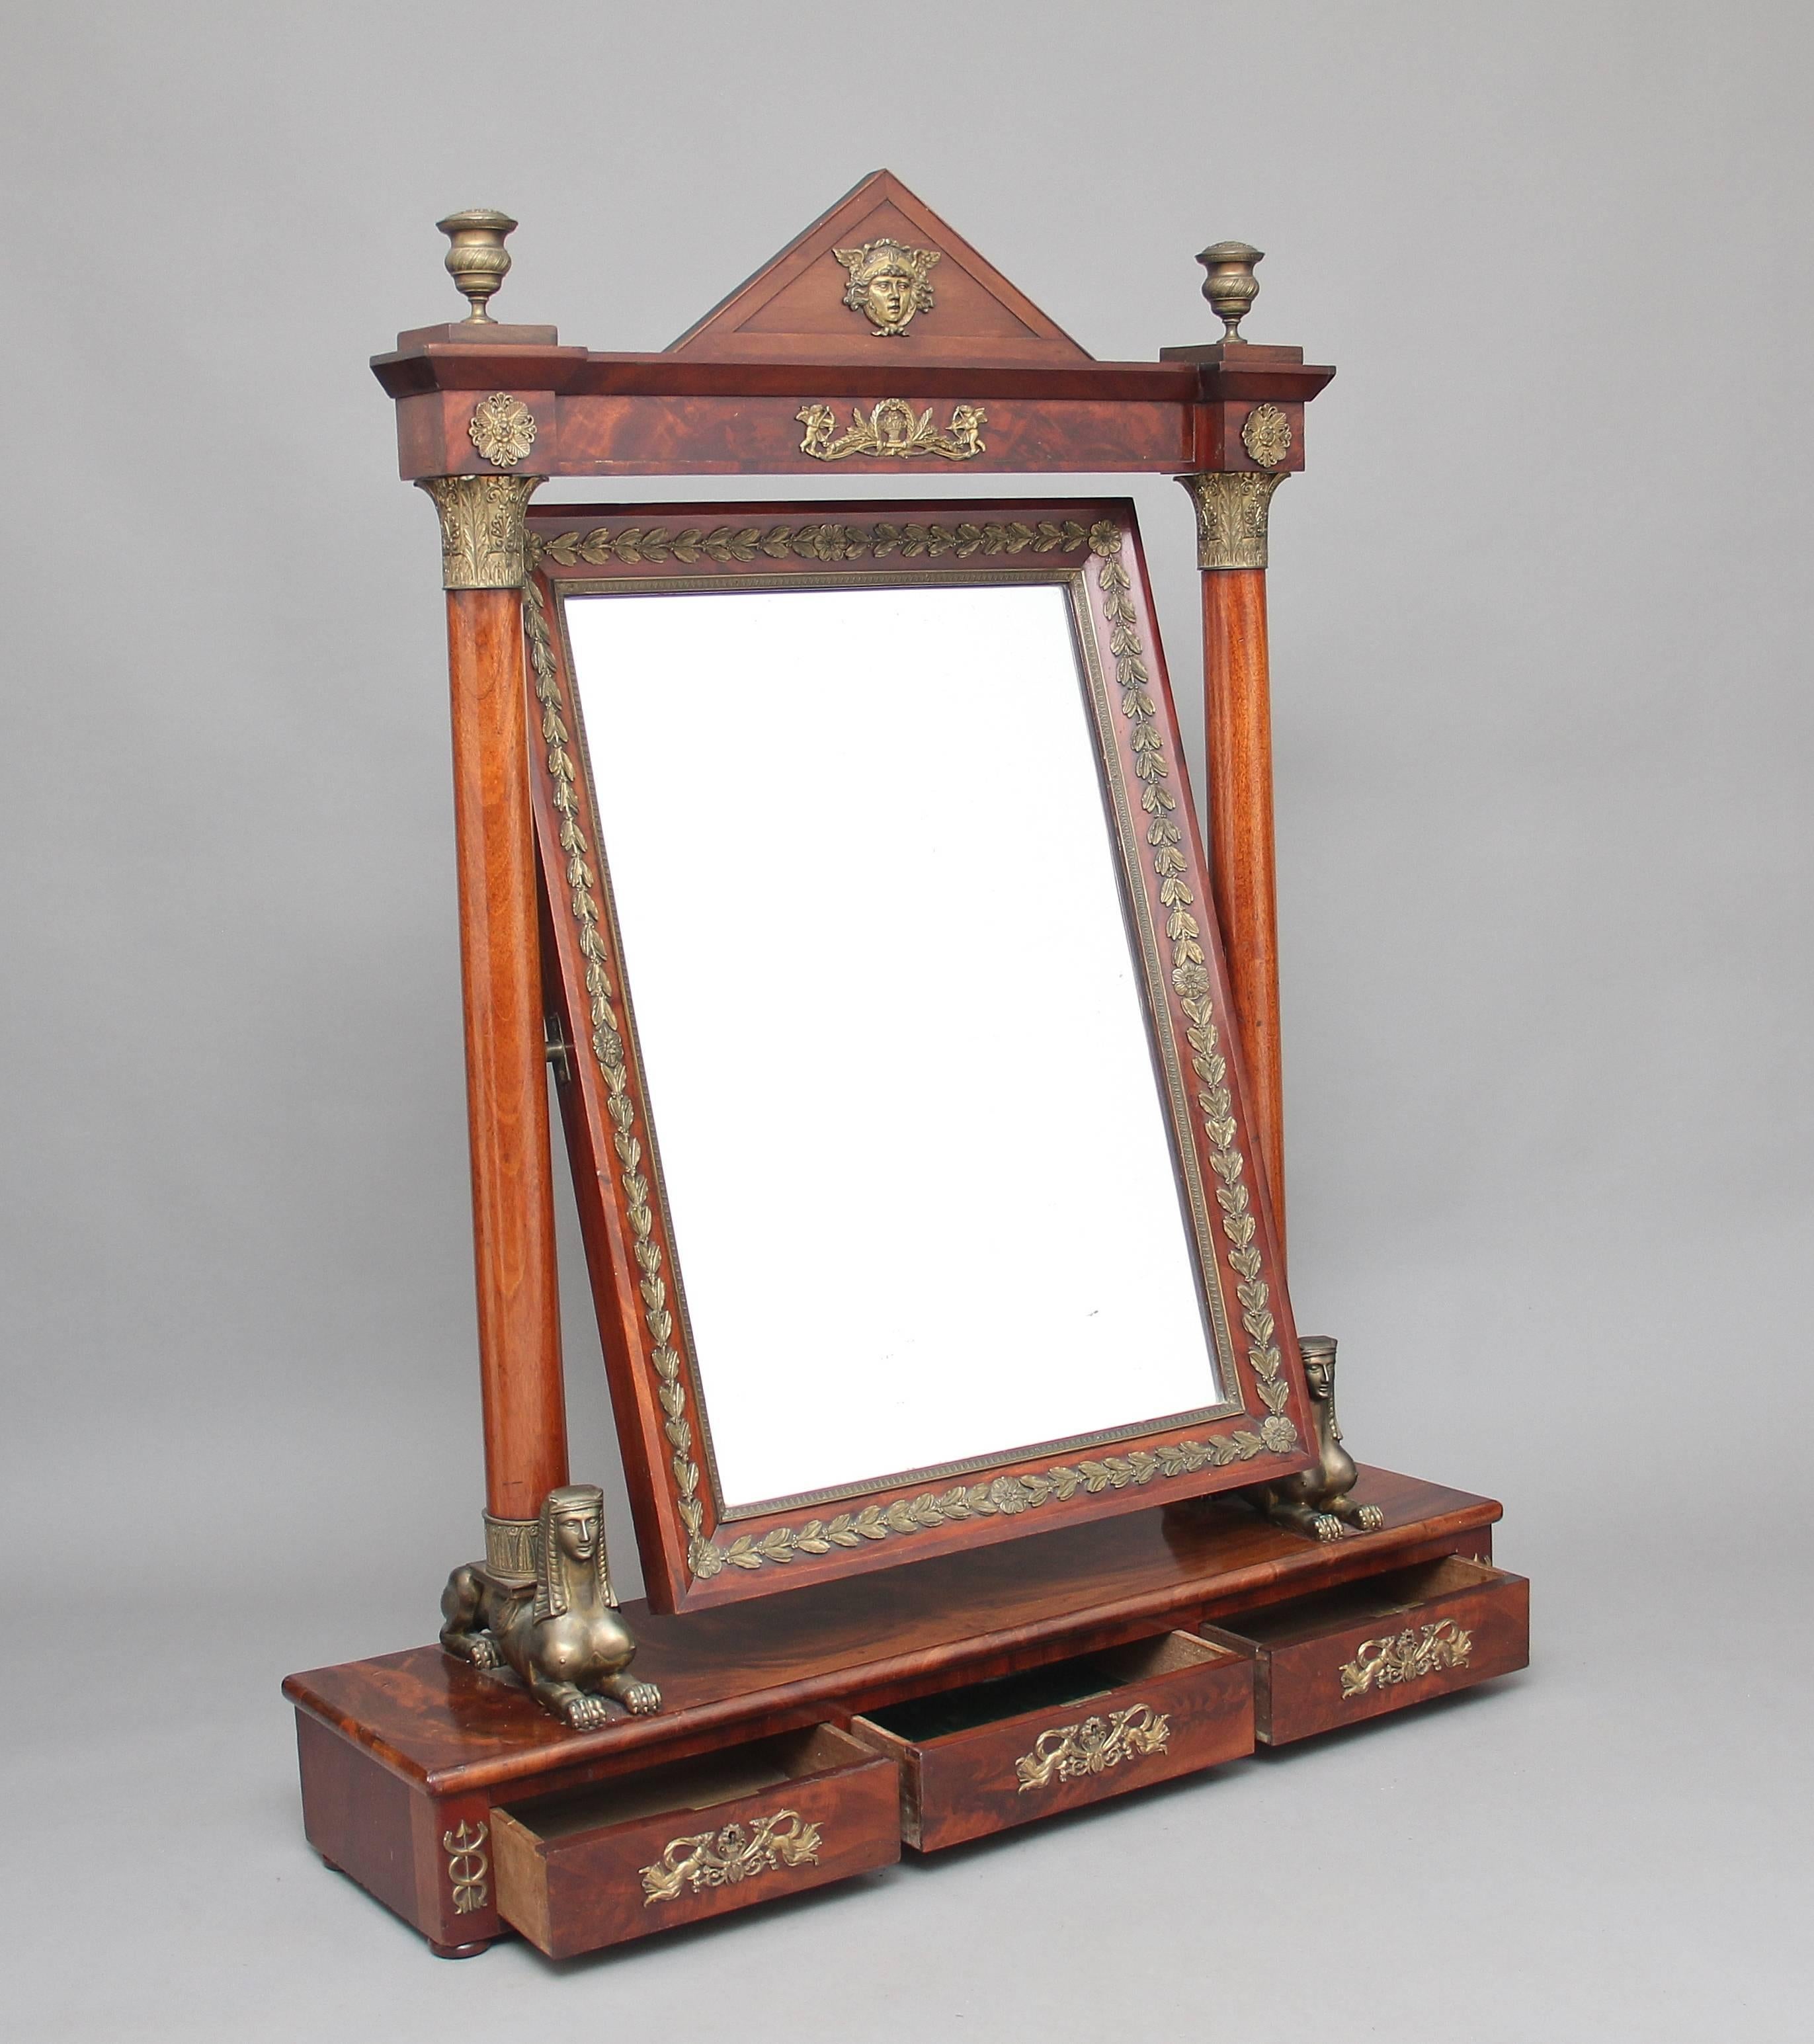 A very impressive large 19th century mahogany and ormolu French Empire dressing mirror with an Egyptian influence, the pyramid shaped top with an ormolu face flanked by ormolu urns, the large swing mirror having ormolu leaf decoration around the